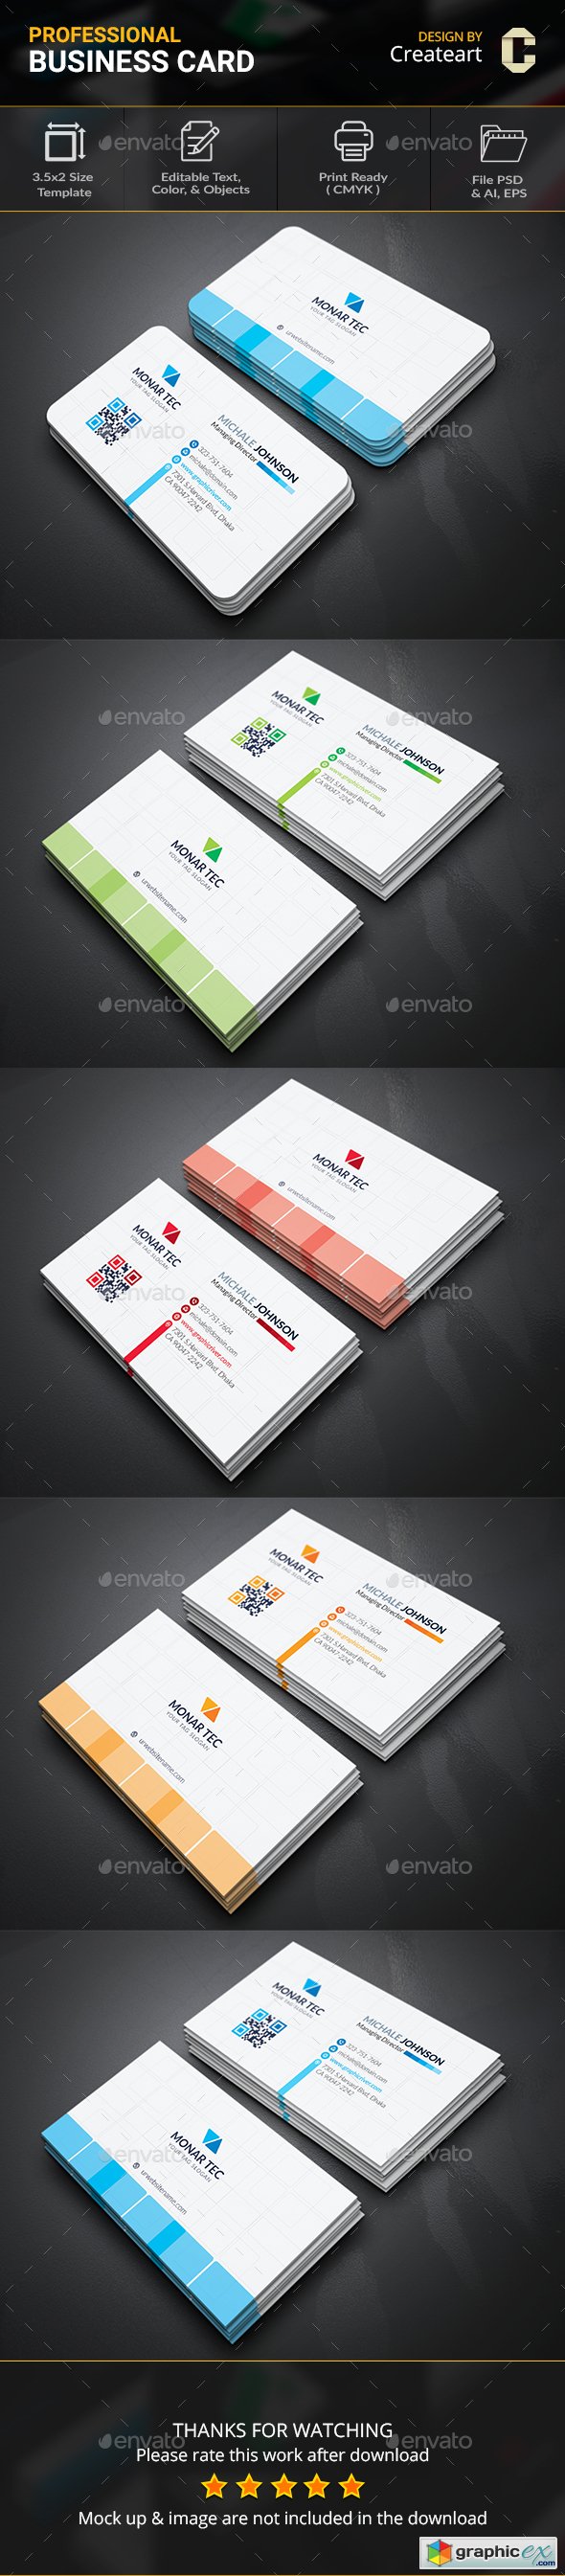 Graphicriver Business Card 20063545